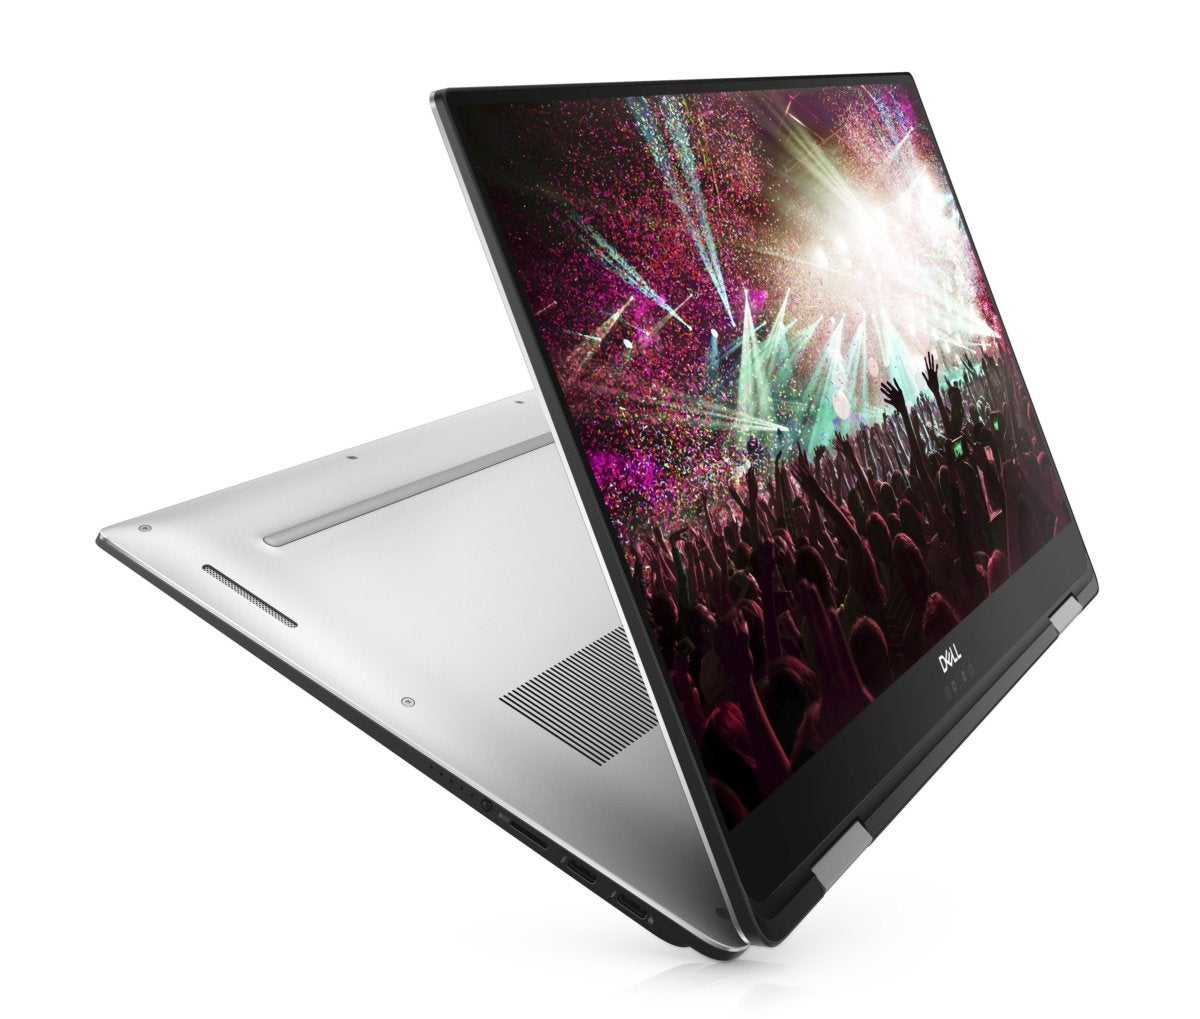 Dell XPS 15 2in1 specs, features, price, and release date TechConnect